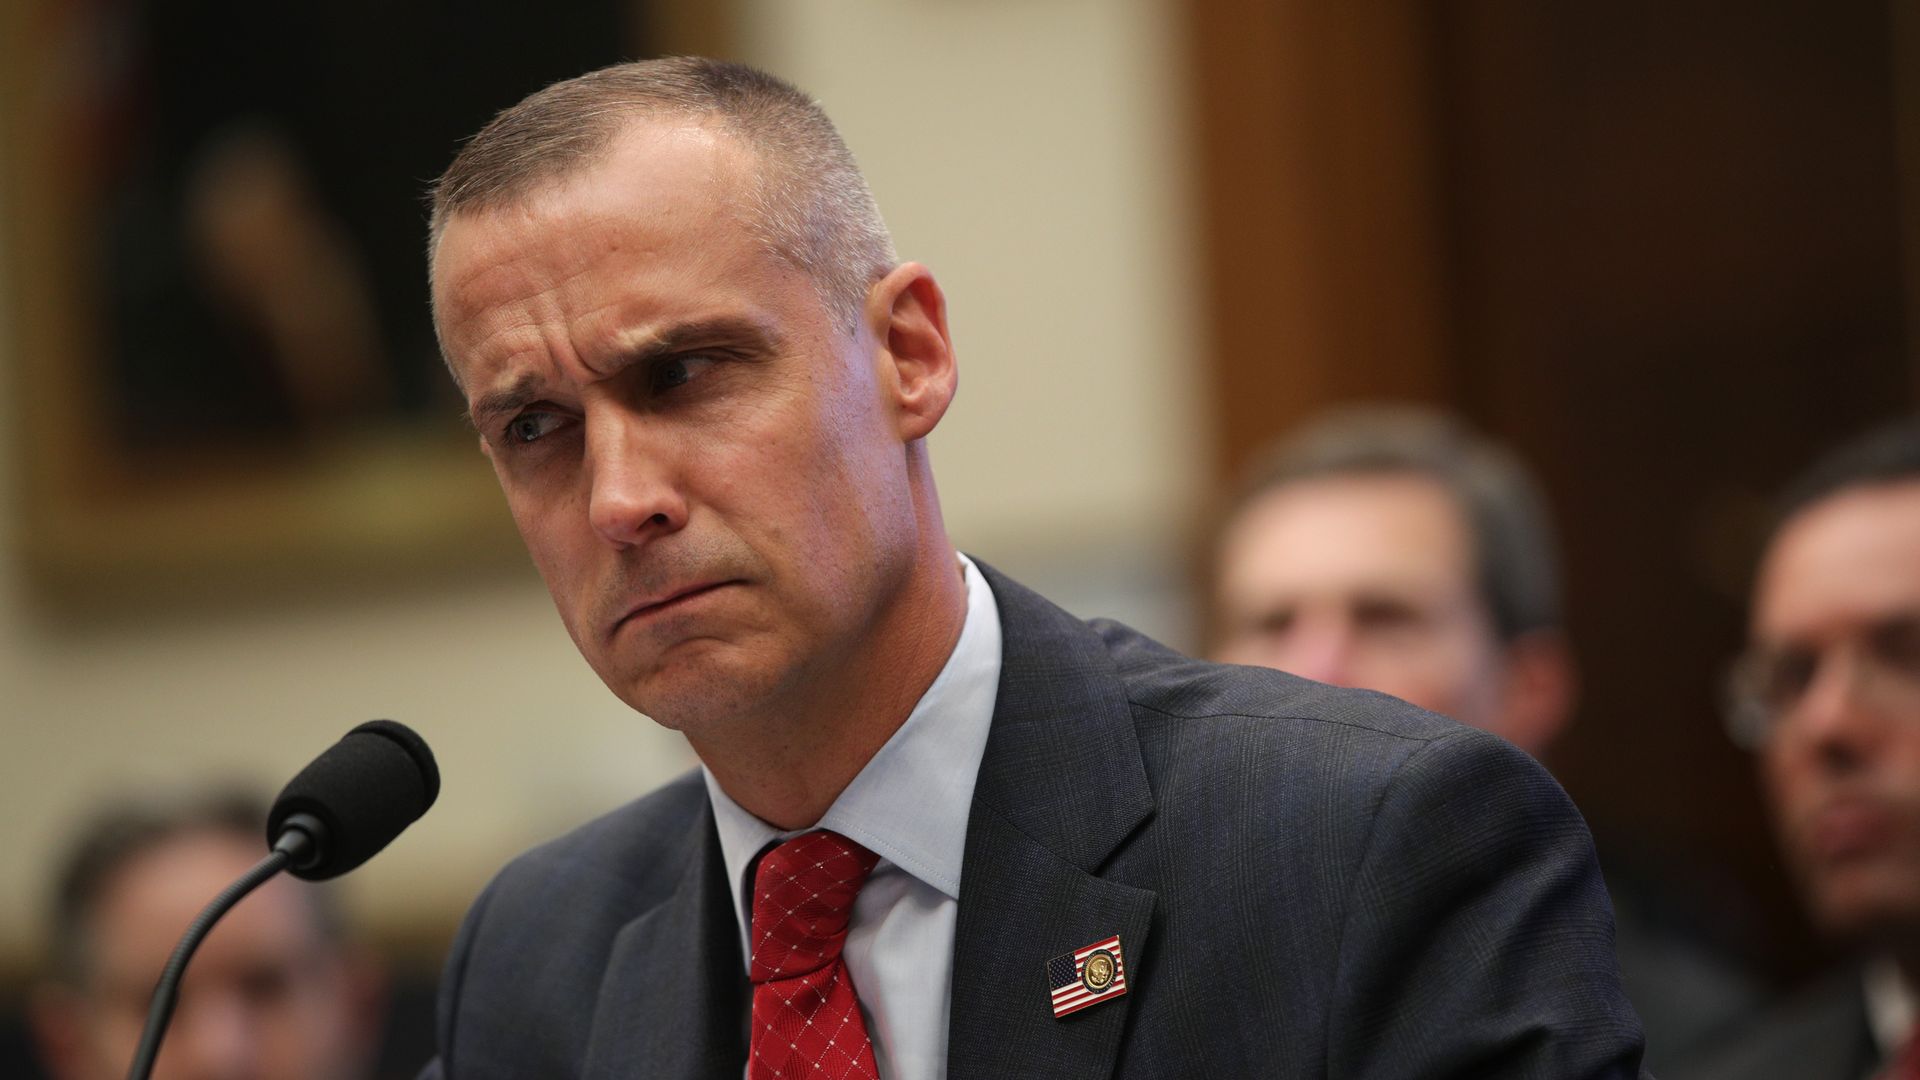 Former Trump campaign manager Corey Lewandowski testifies during a hearing before the House Judiciary Committee